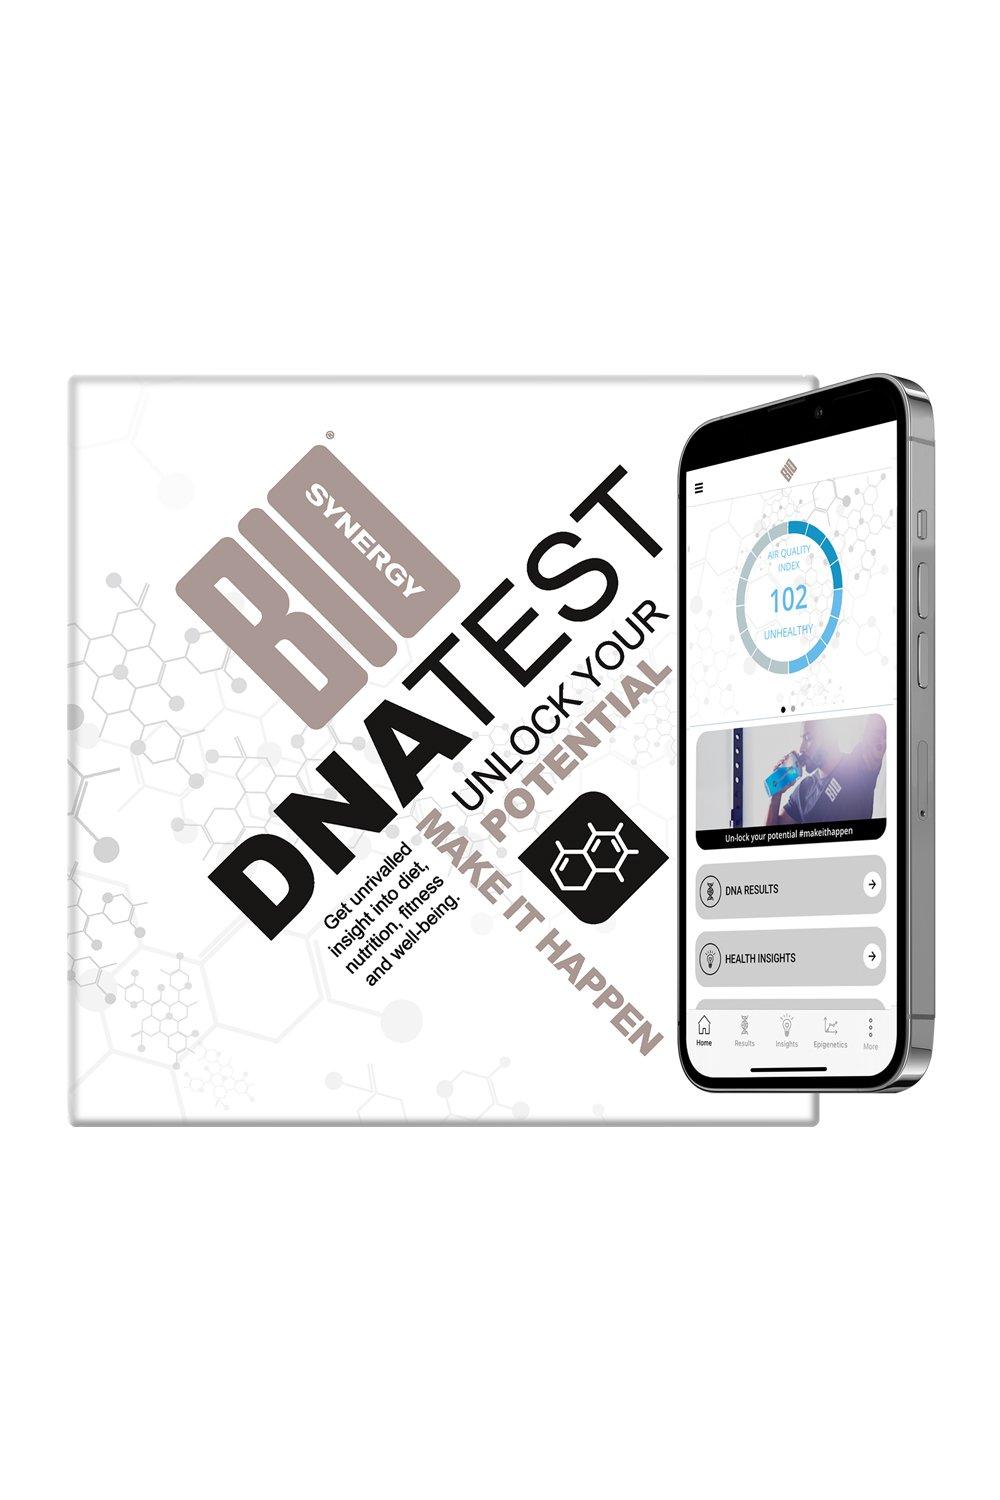 DNA home testing kit & app provides over 300 personalised reports